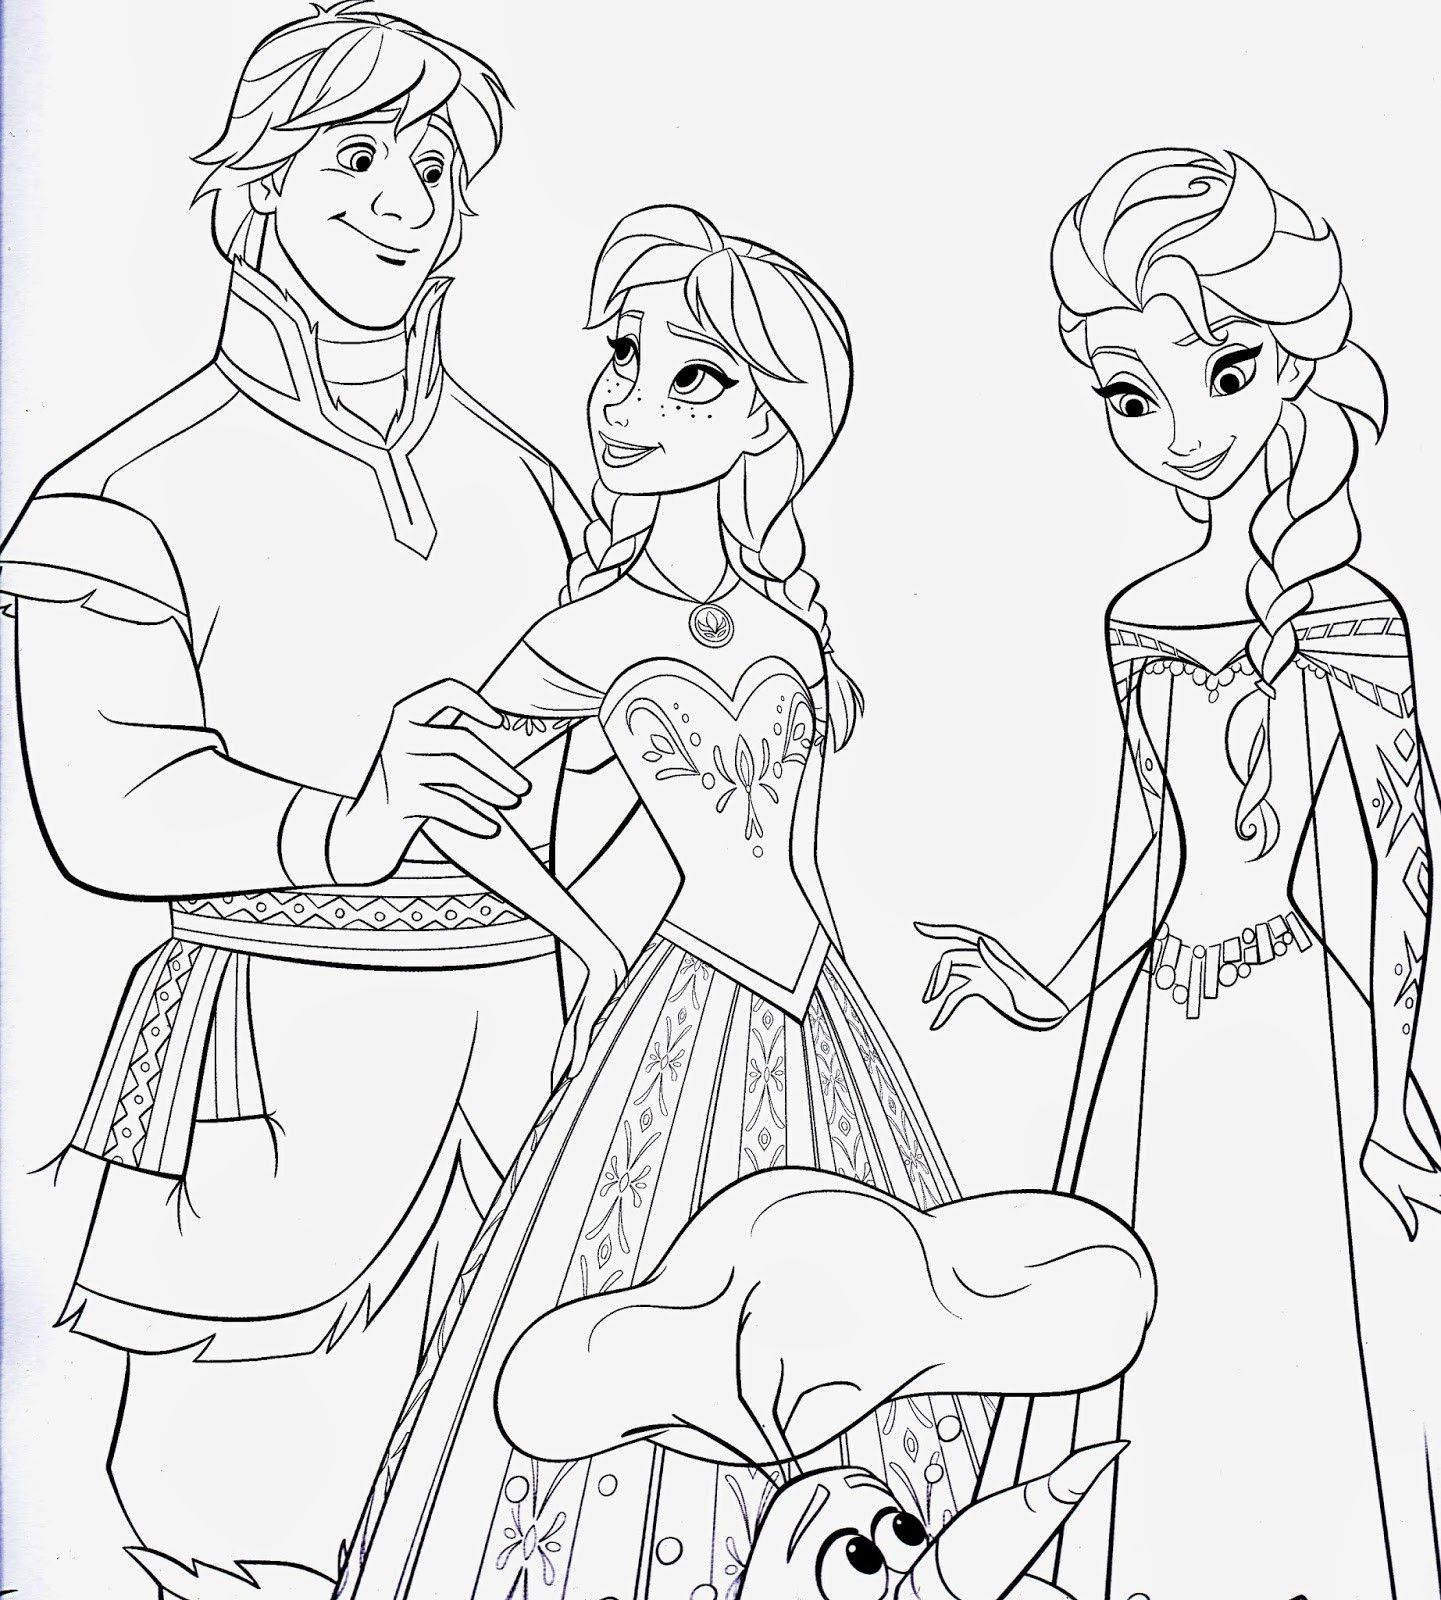 Printable Coloring Pages Frozen
 Disney Movie Princesses "Frozen" Printable Coloring Pages